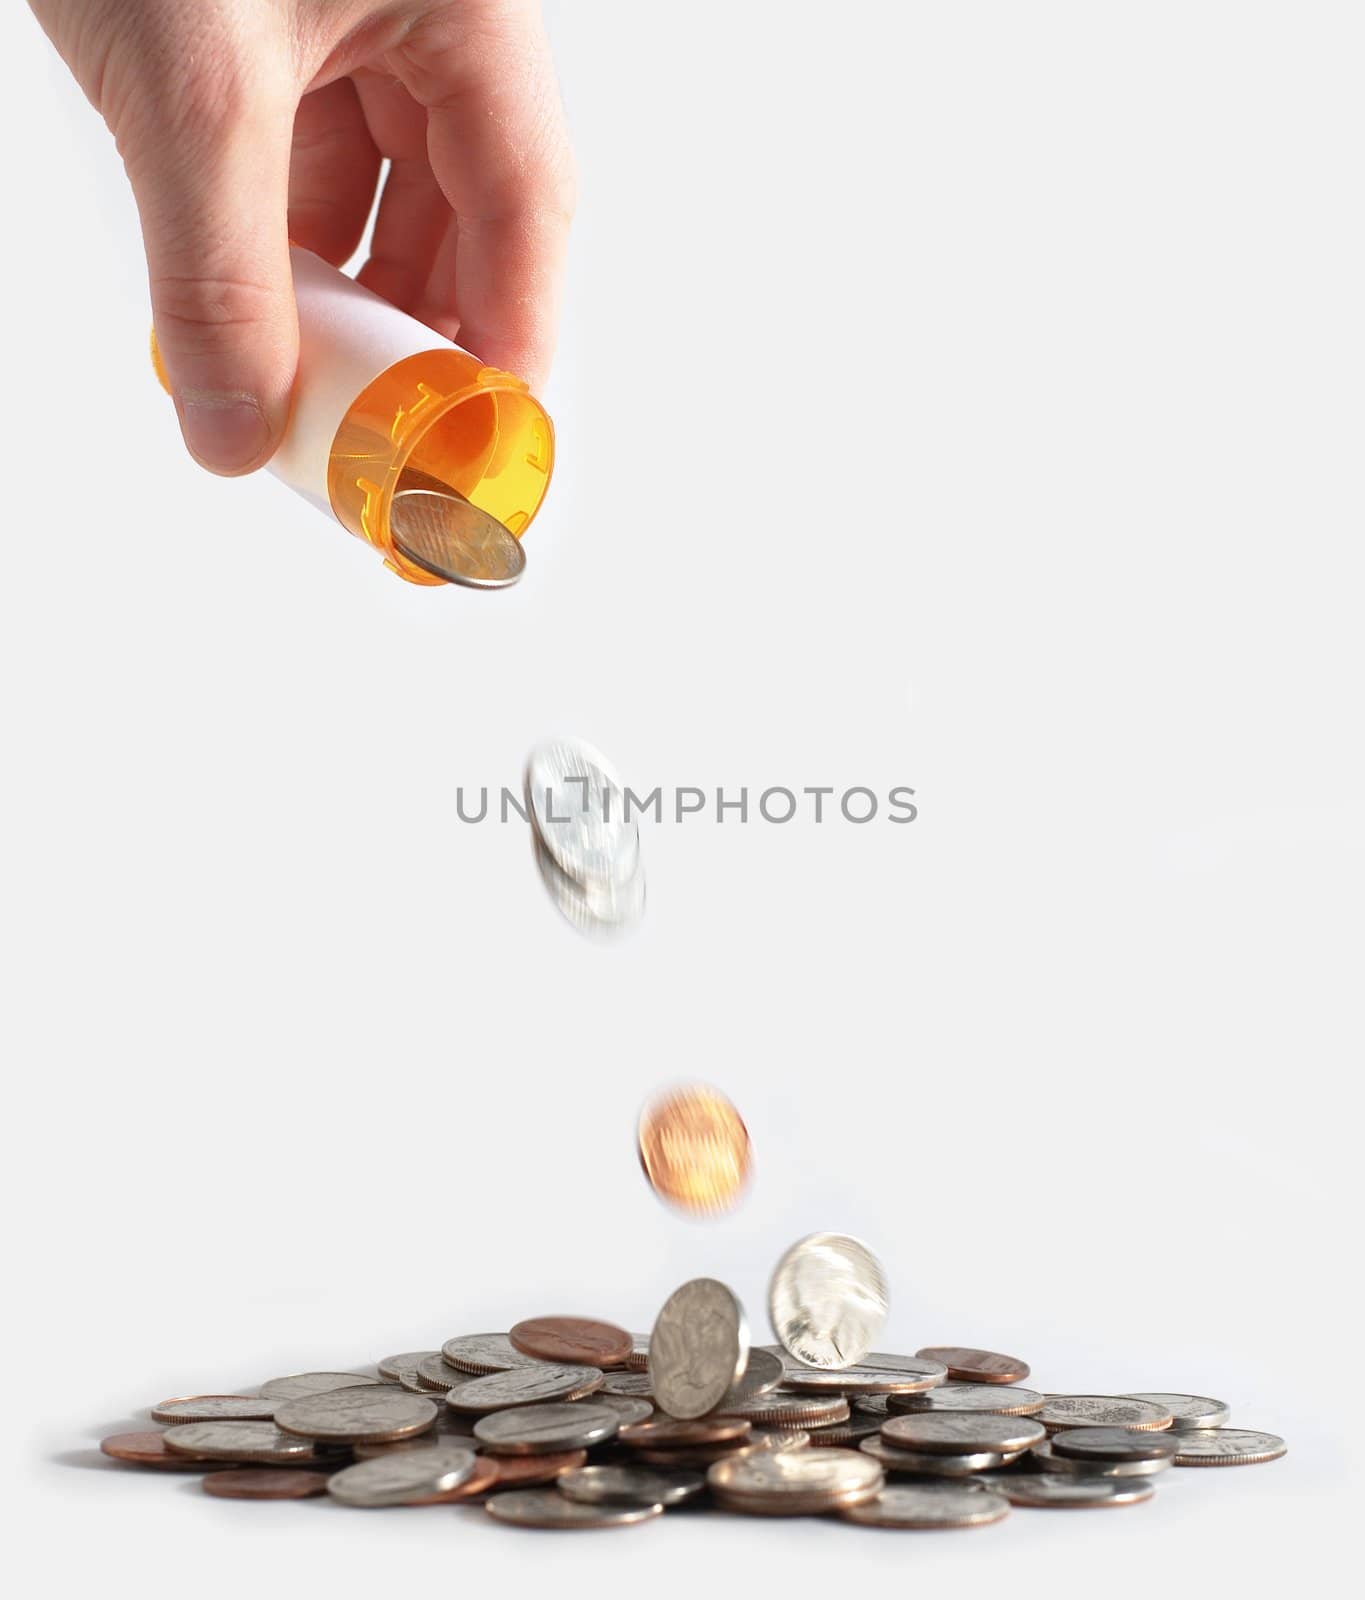 Coins falling from RX bottle against white background.